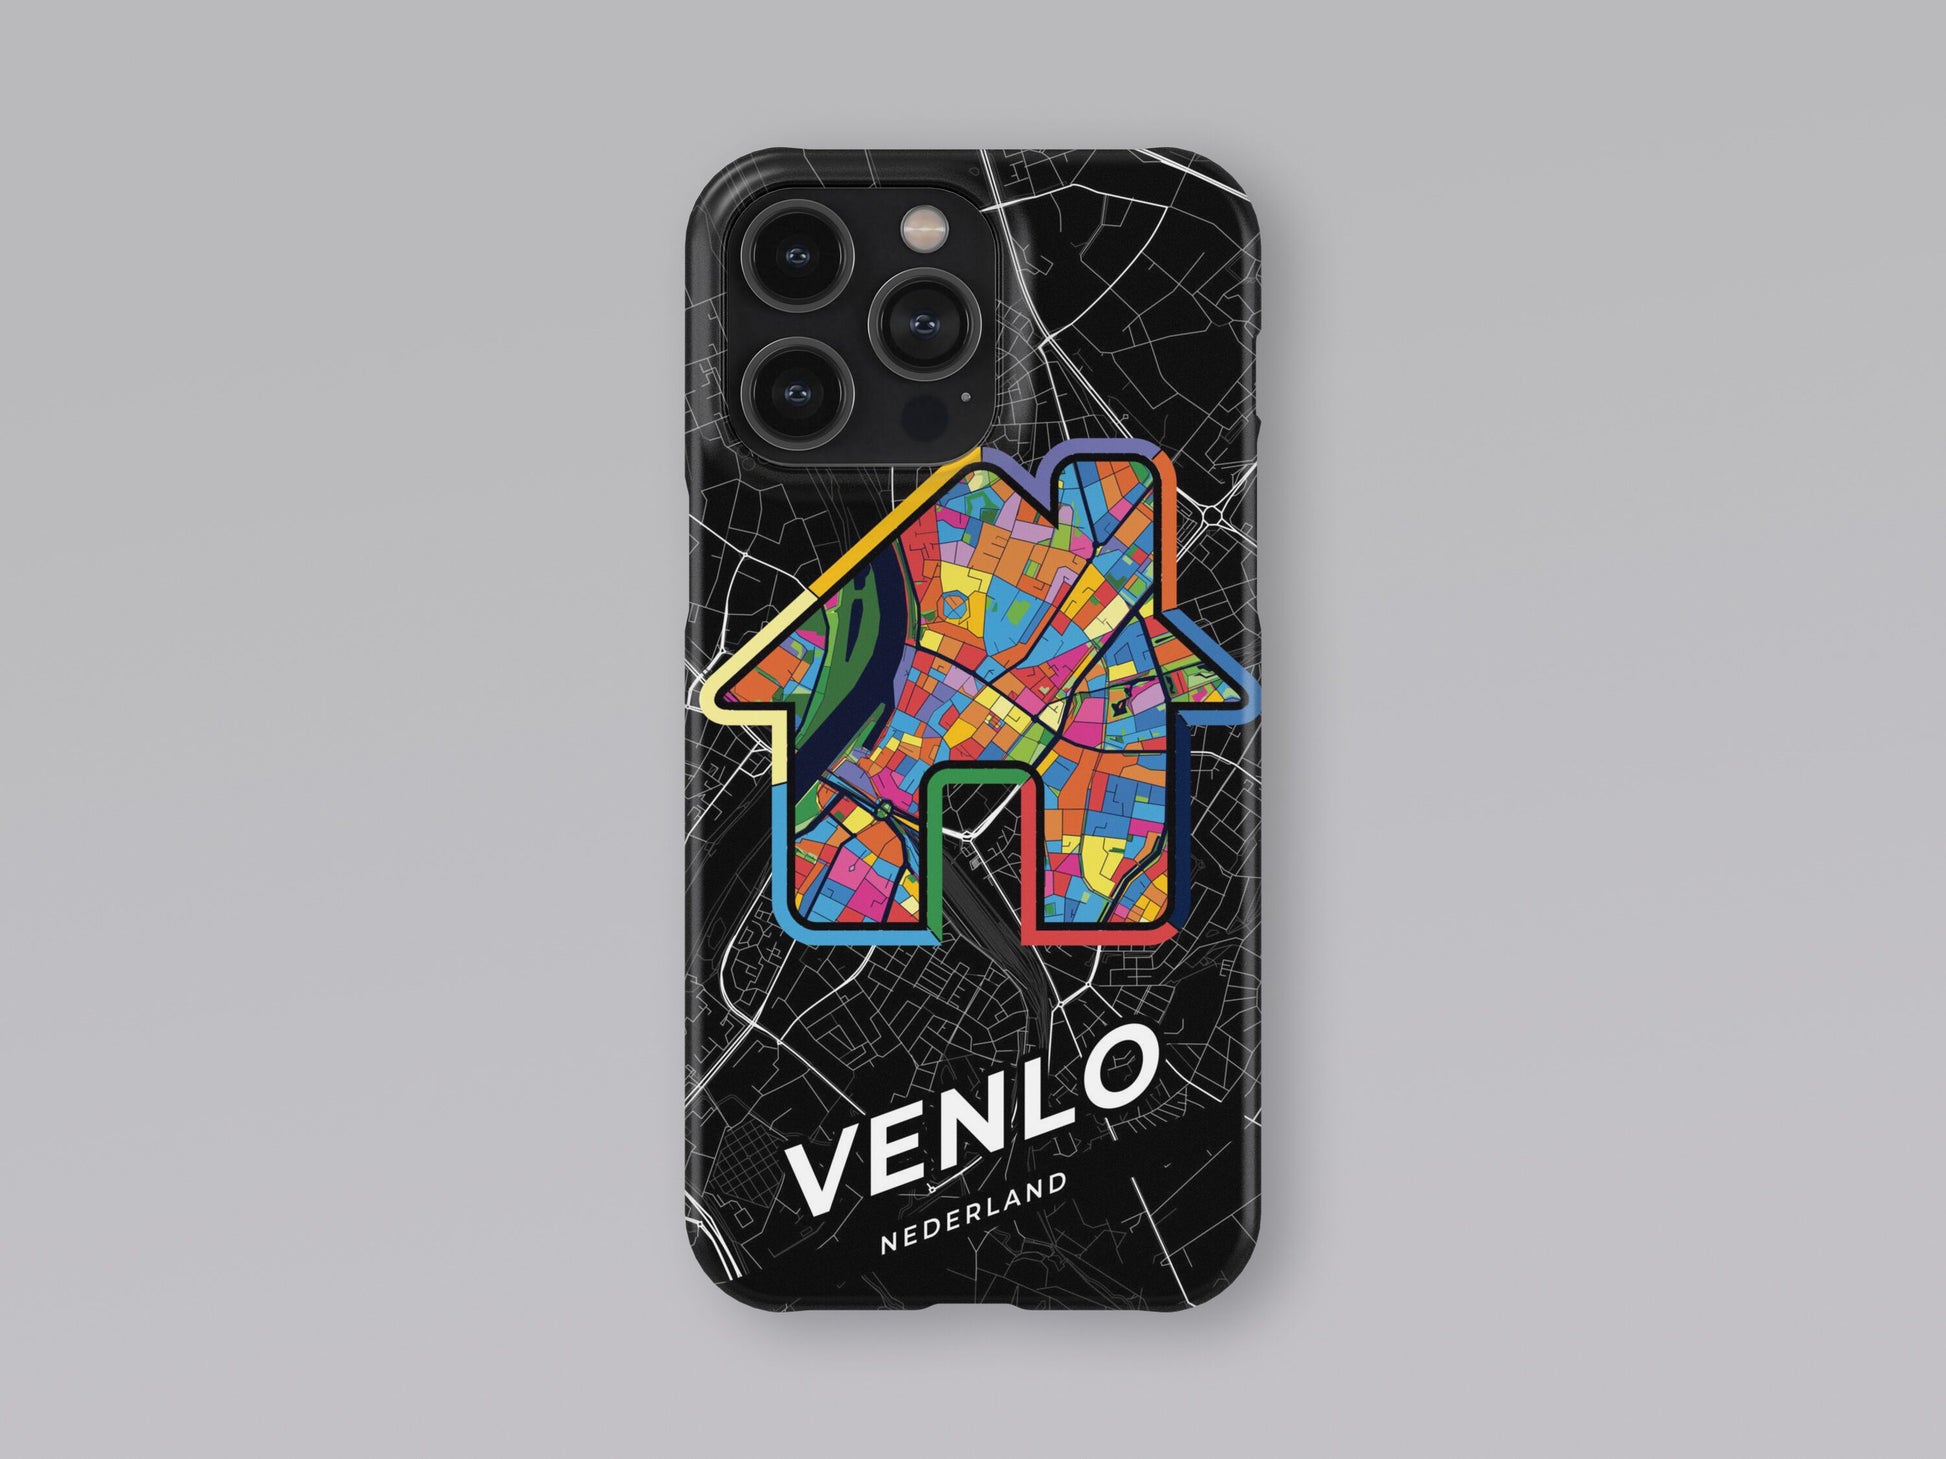 Venlo Netherlands slim phone case with colorful icon 3